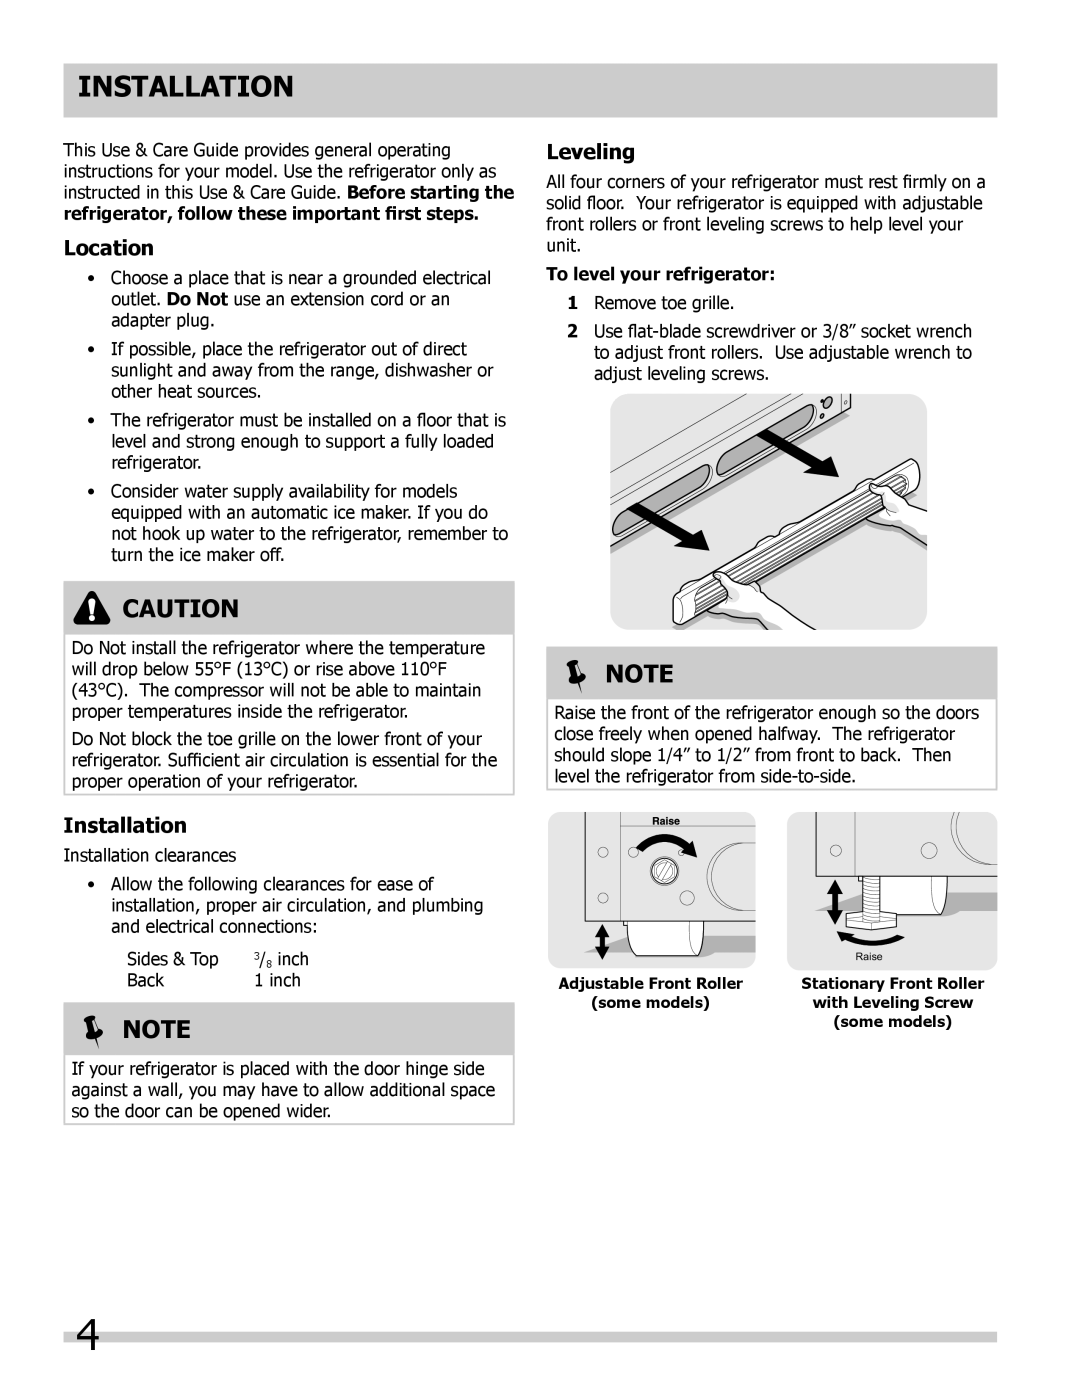 Frigidaire FGUI2149LF important safety instructions Installation, Note, Location, Leveling 